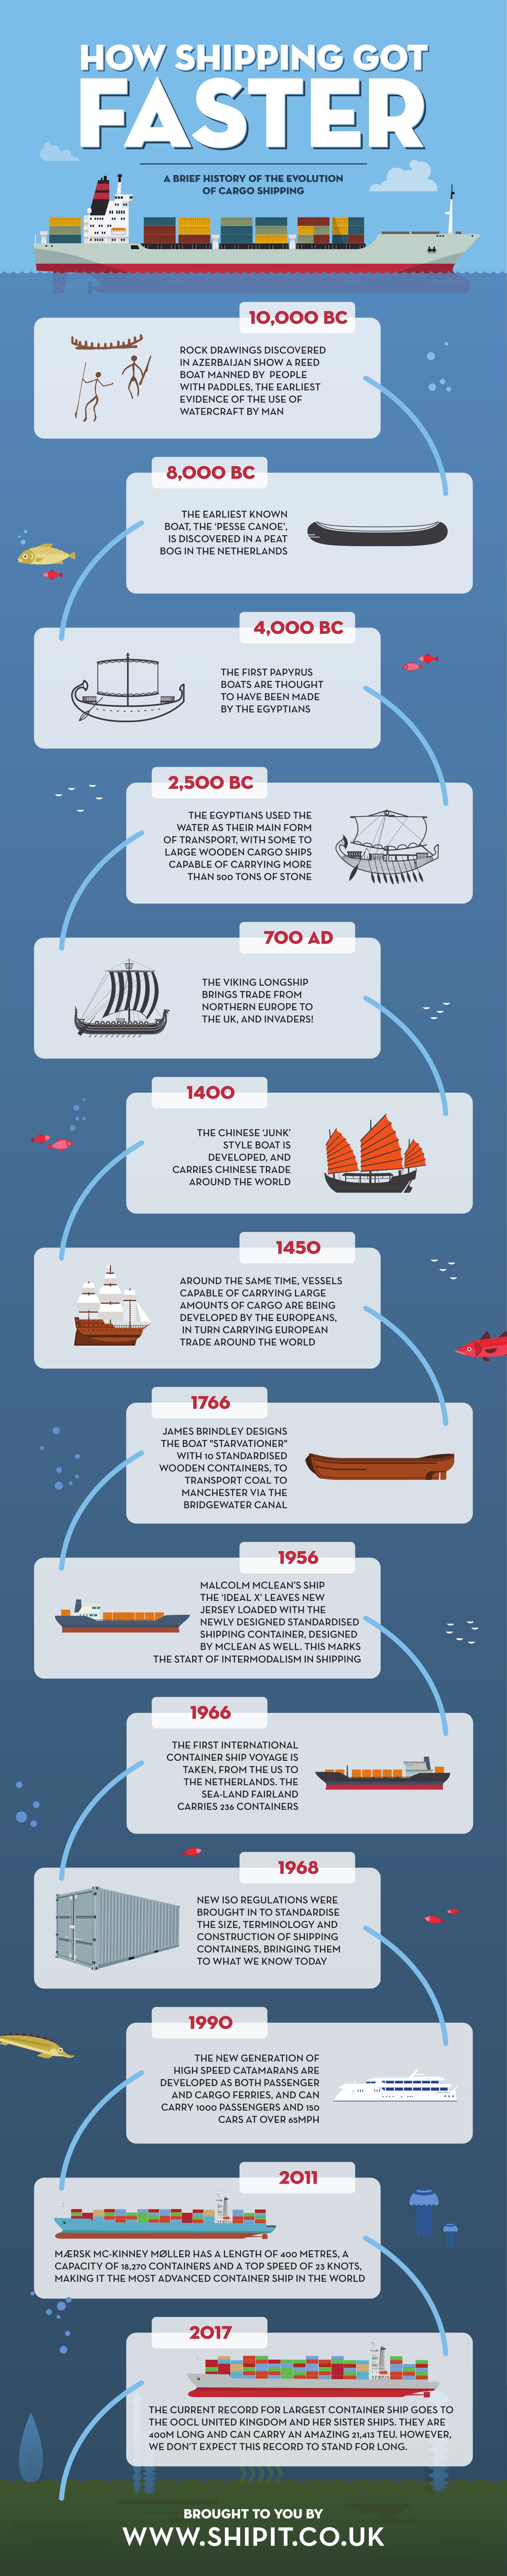 How Shipping Got Faster